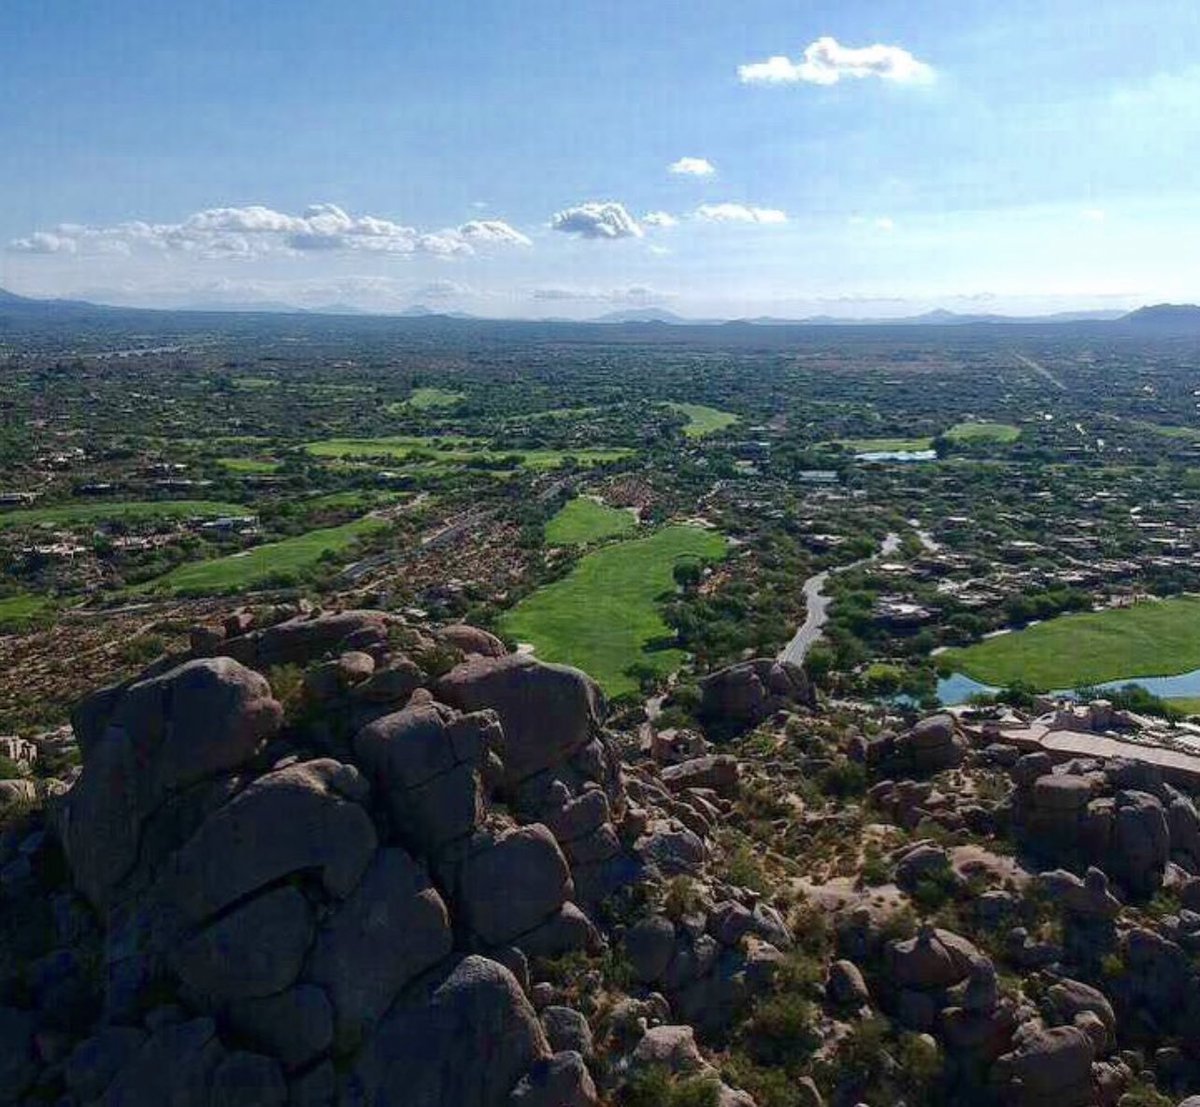 Plan your weekend early by booking a tee time with us!☀️🌵 480-488-9028 theboulders.ezlinksgolf.com #bestofboulders #golfswing #scottsdale #golfresort #whyilovethisgame